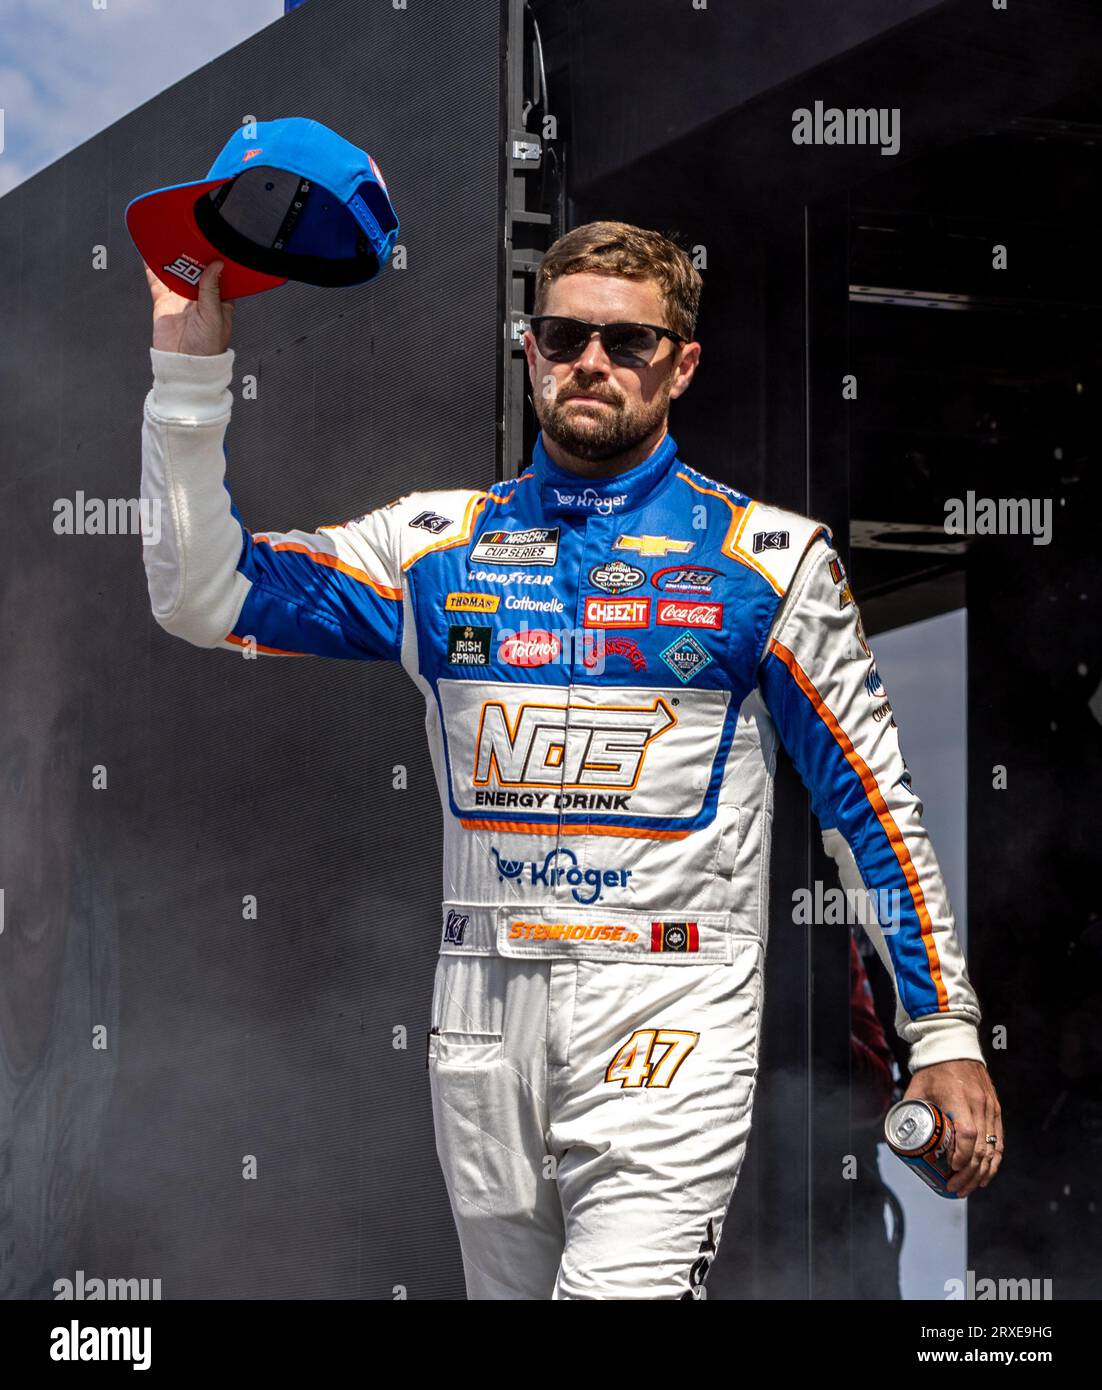 Fort Worth, Texas - September 24rd, 2023: Ricky Stenhouse Jr, driver of the #47 Kroger/NOS Energy Drink Chevrolet, competing in the NASCAR Autotrader EchoPark Automotive 400 at Texas Motor Speedway. Credit: Nick Paruch/Alamy Live News Stock Photo